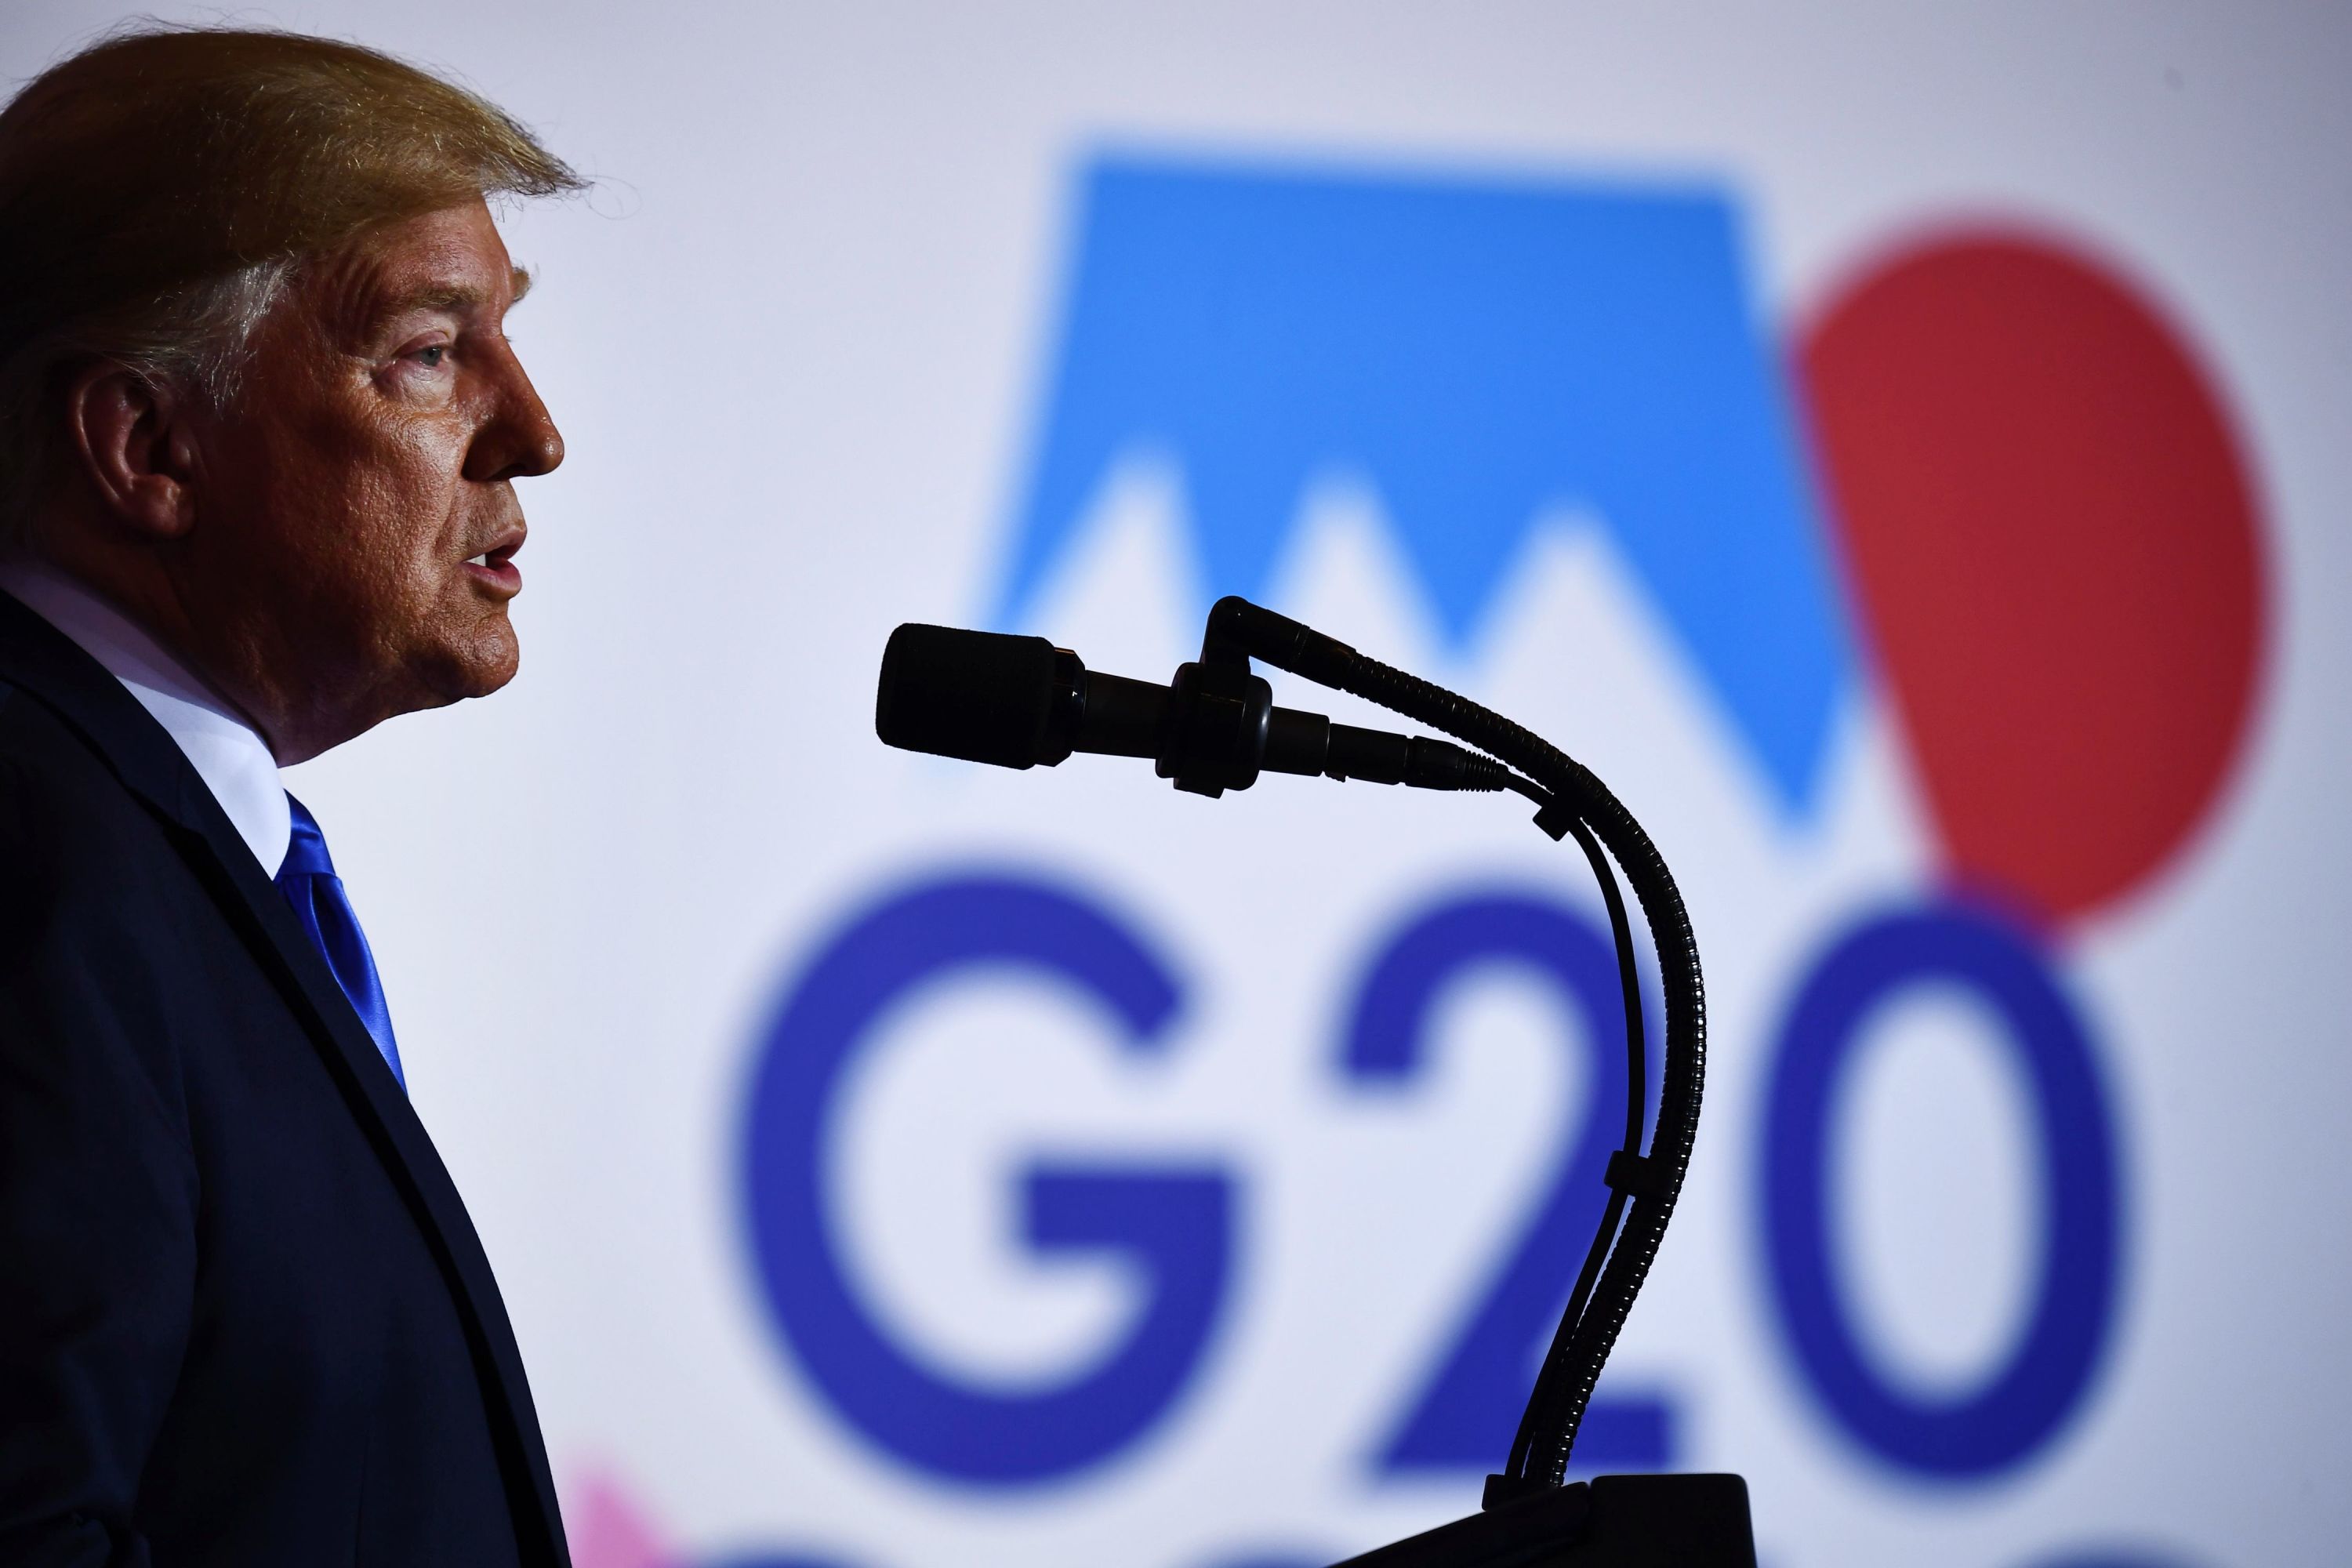 US President Donald Trump speaks during a press conference on the sidelines of the G20 summit on Saturday, June 29.